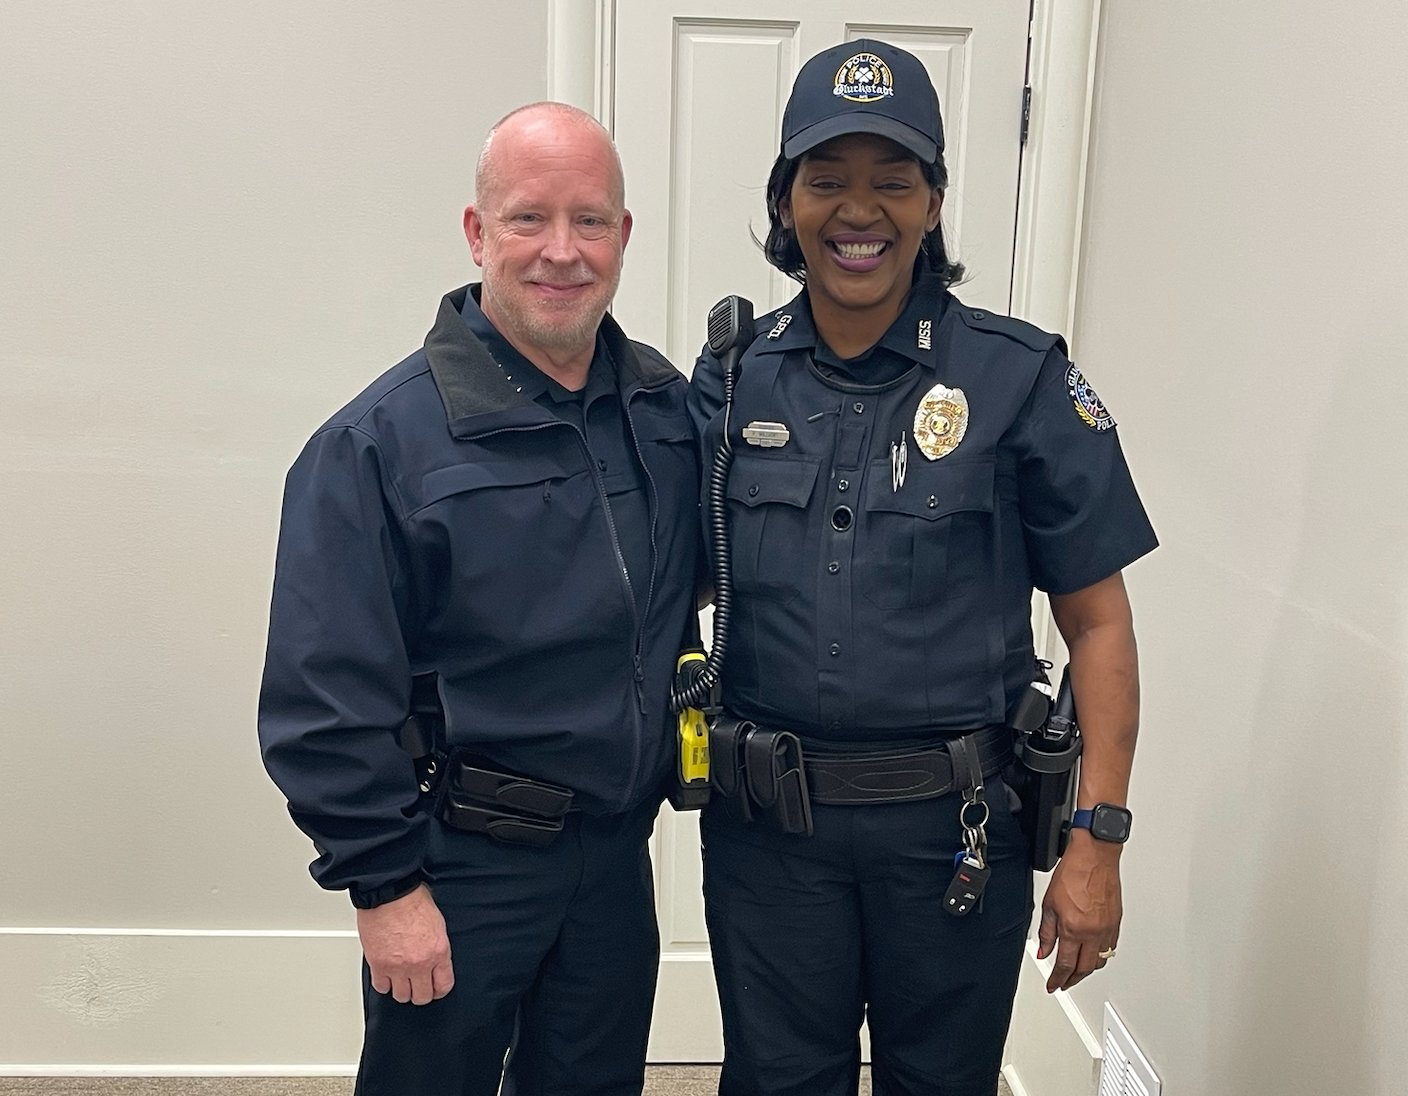 Gluckstadt Police Chief Wendell Watts and officer Patricia
Williams